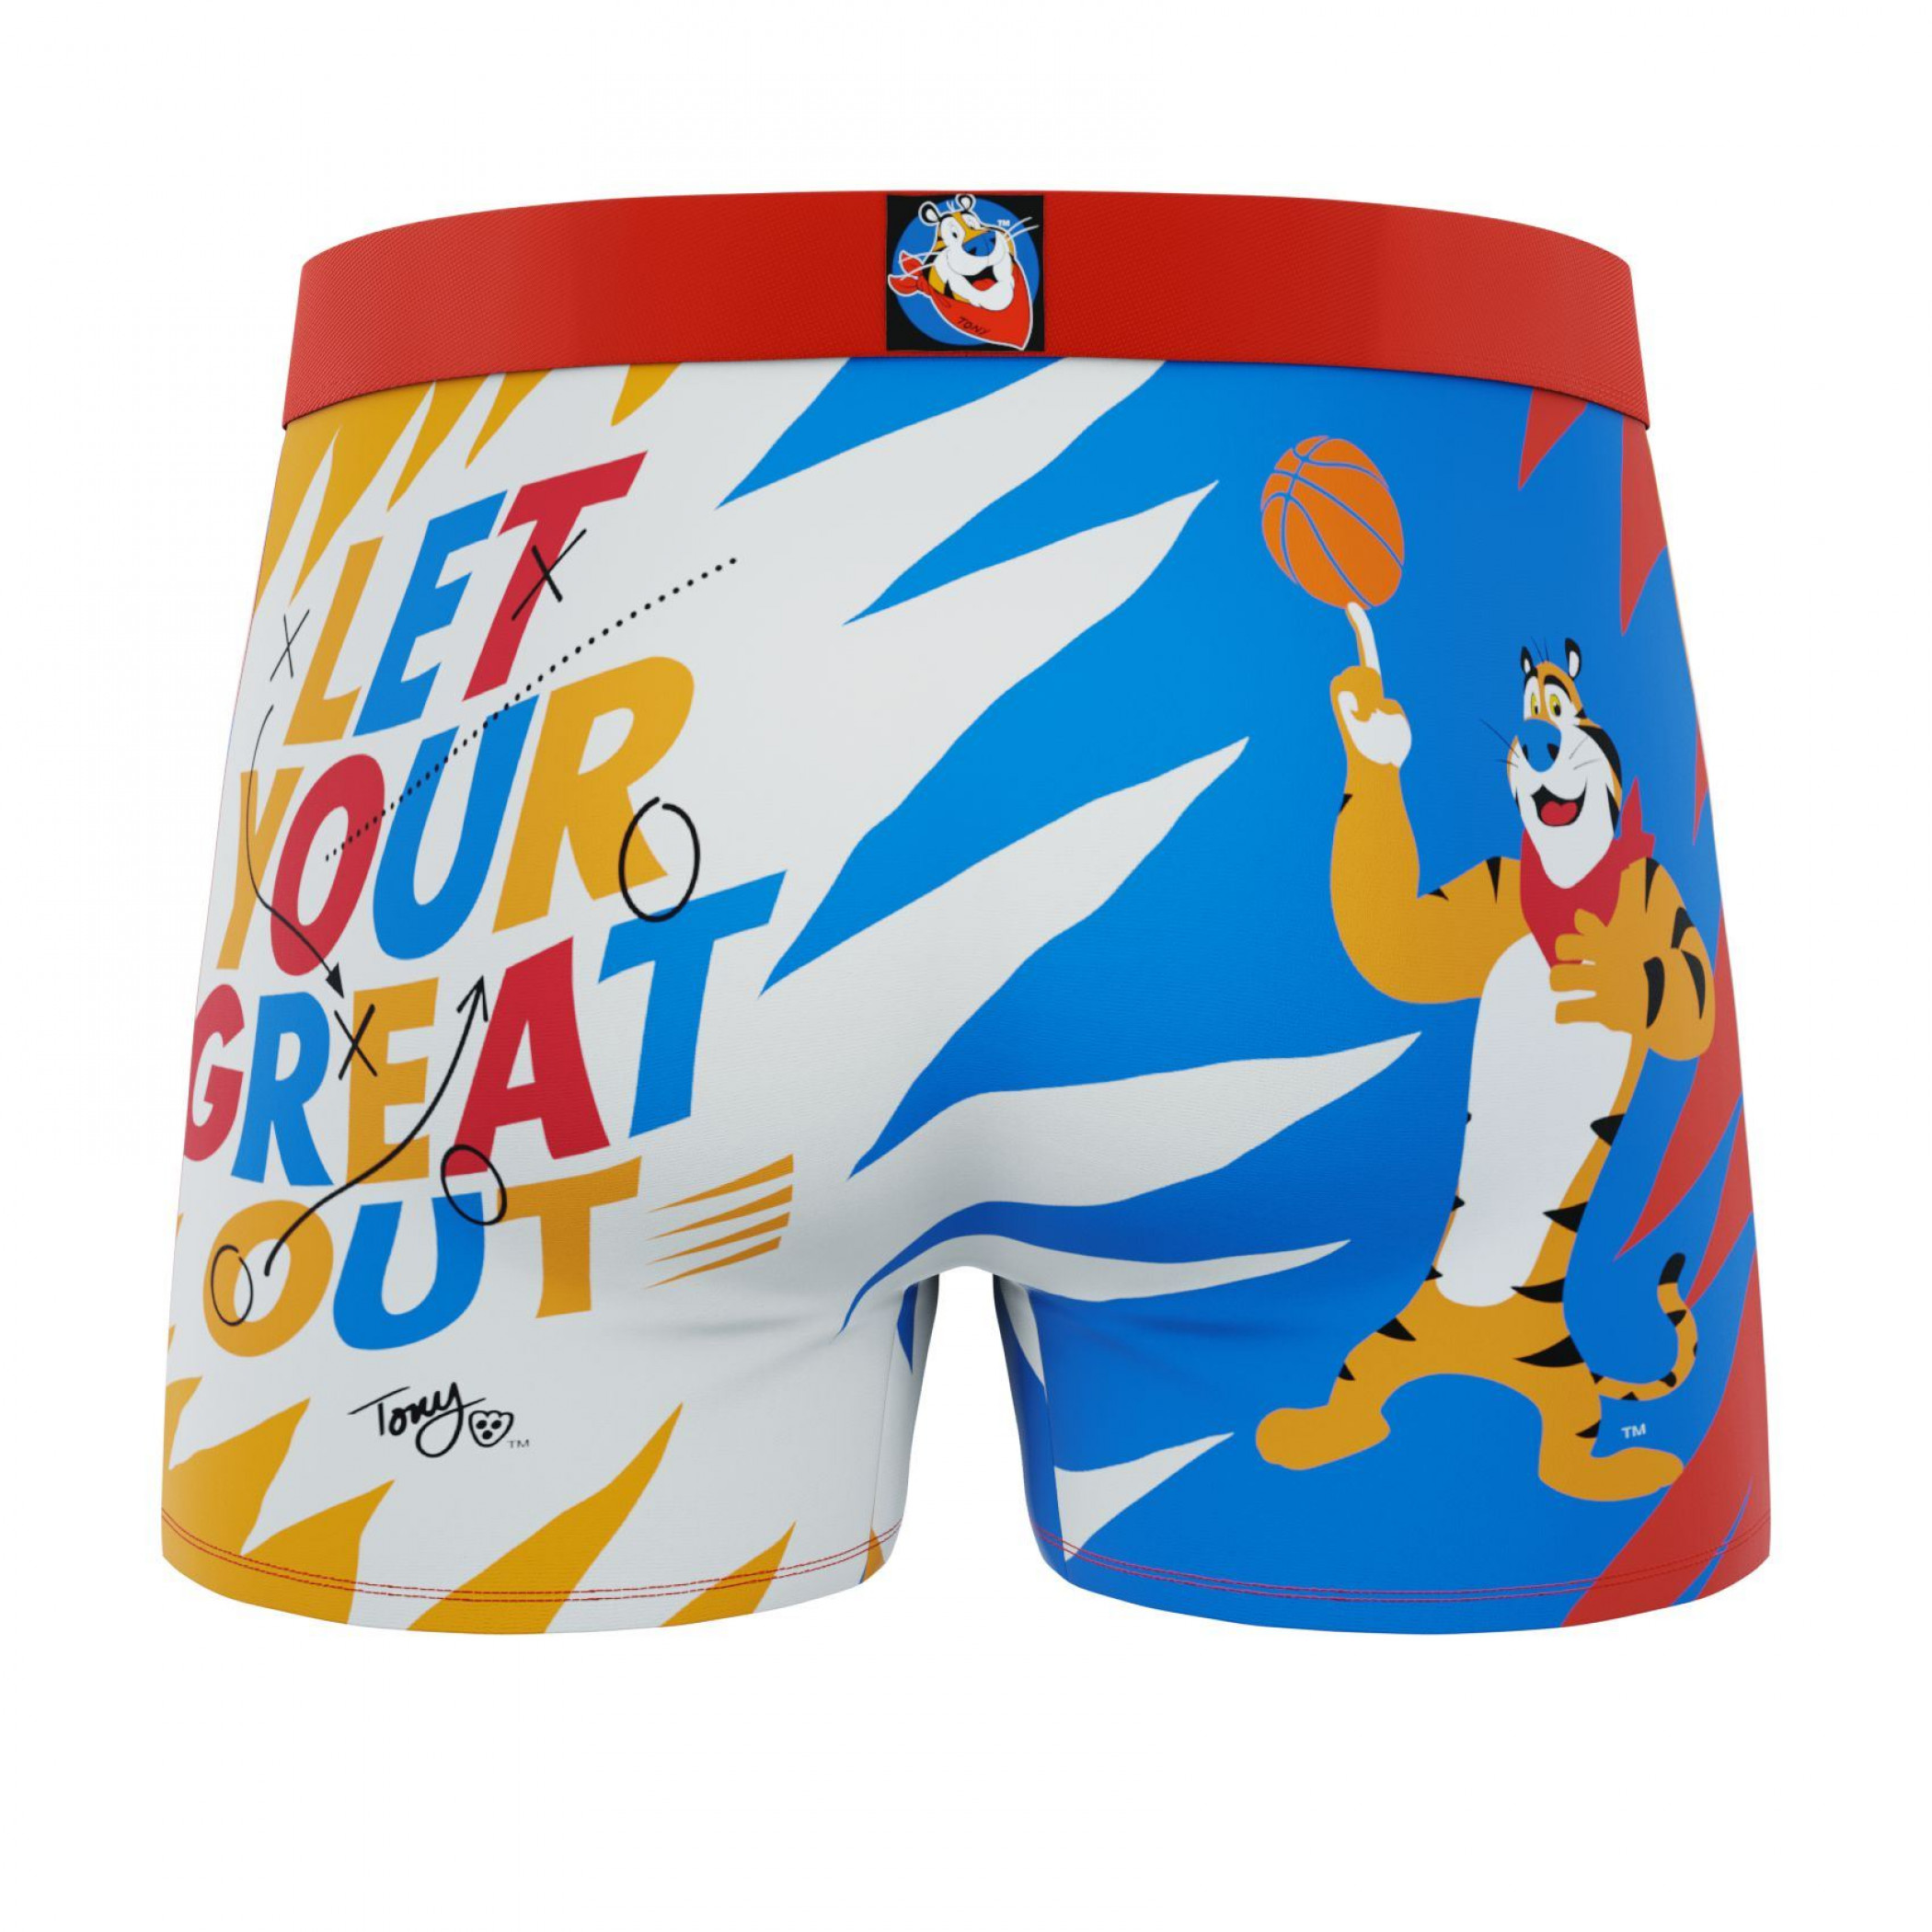 Crazy Boxers Frosted Flakes Let Your Great Out Boxer Briefs